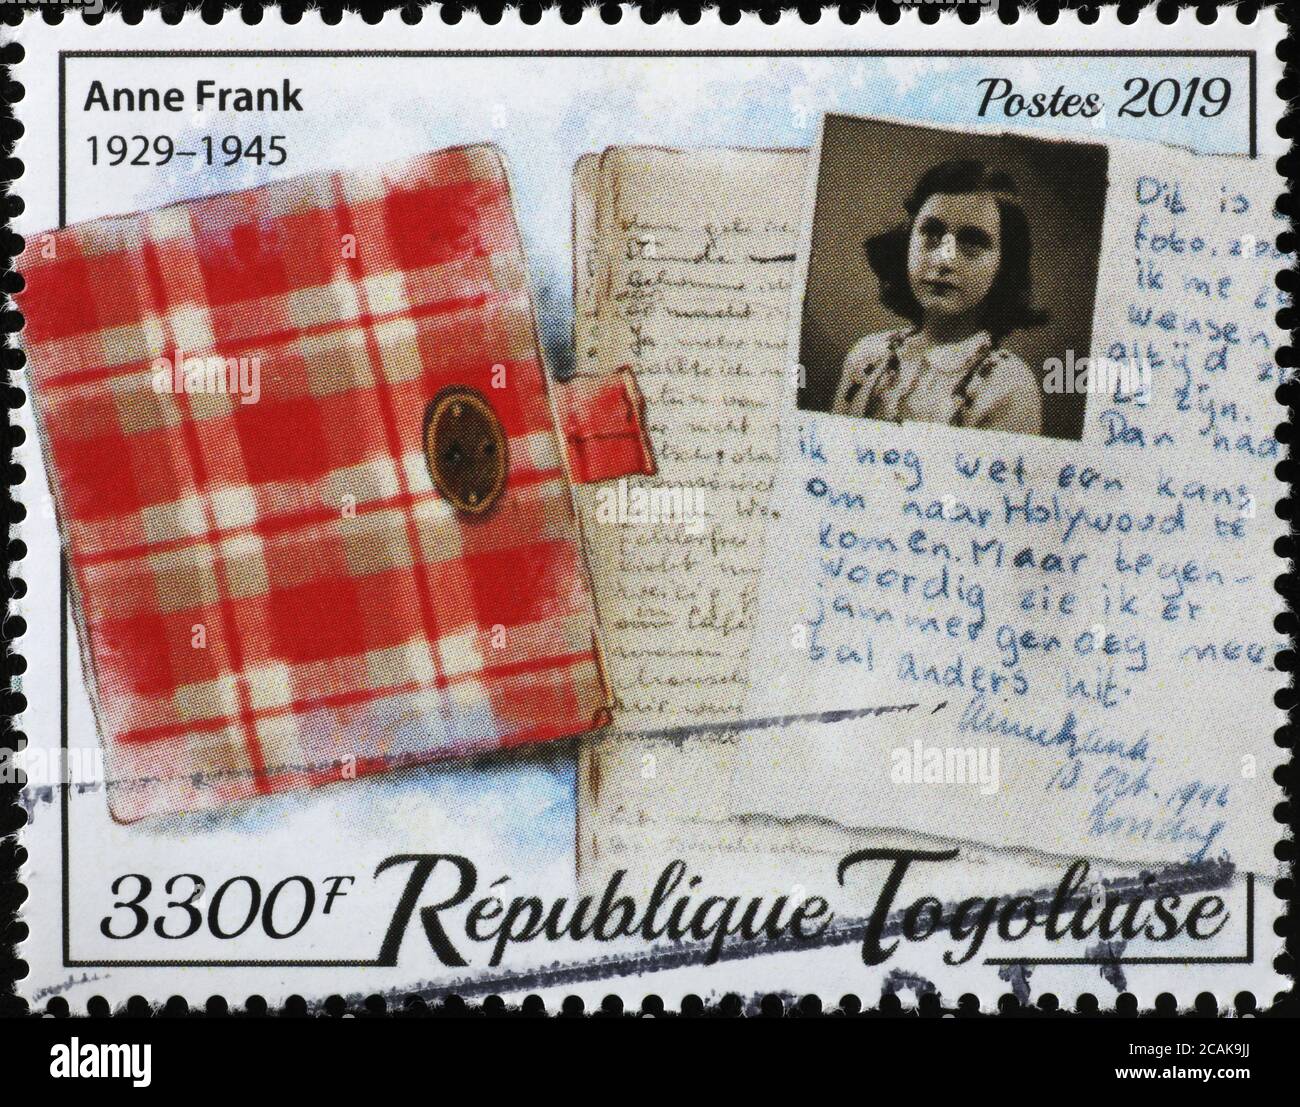 The diary of Anne Franck on postage stamp Stock Photo